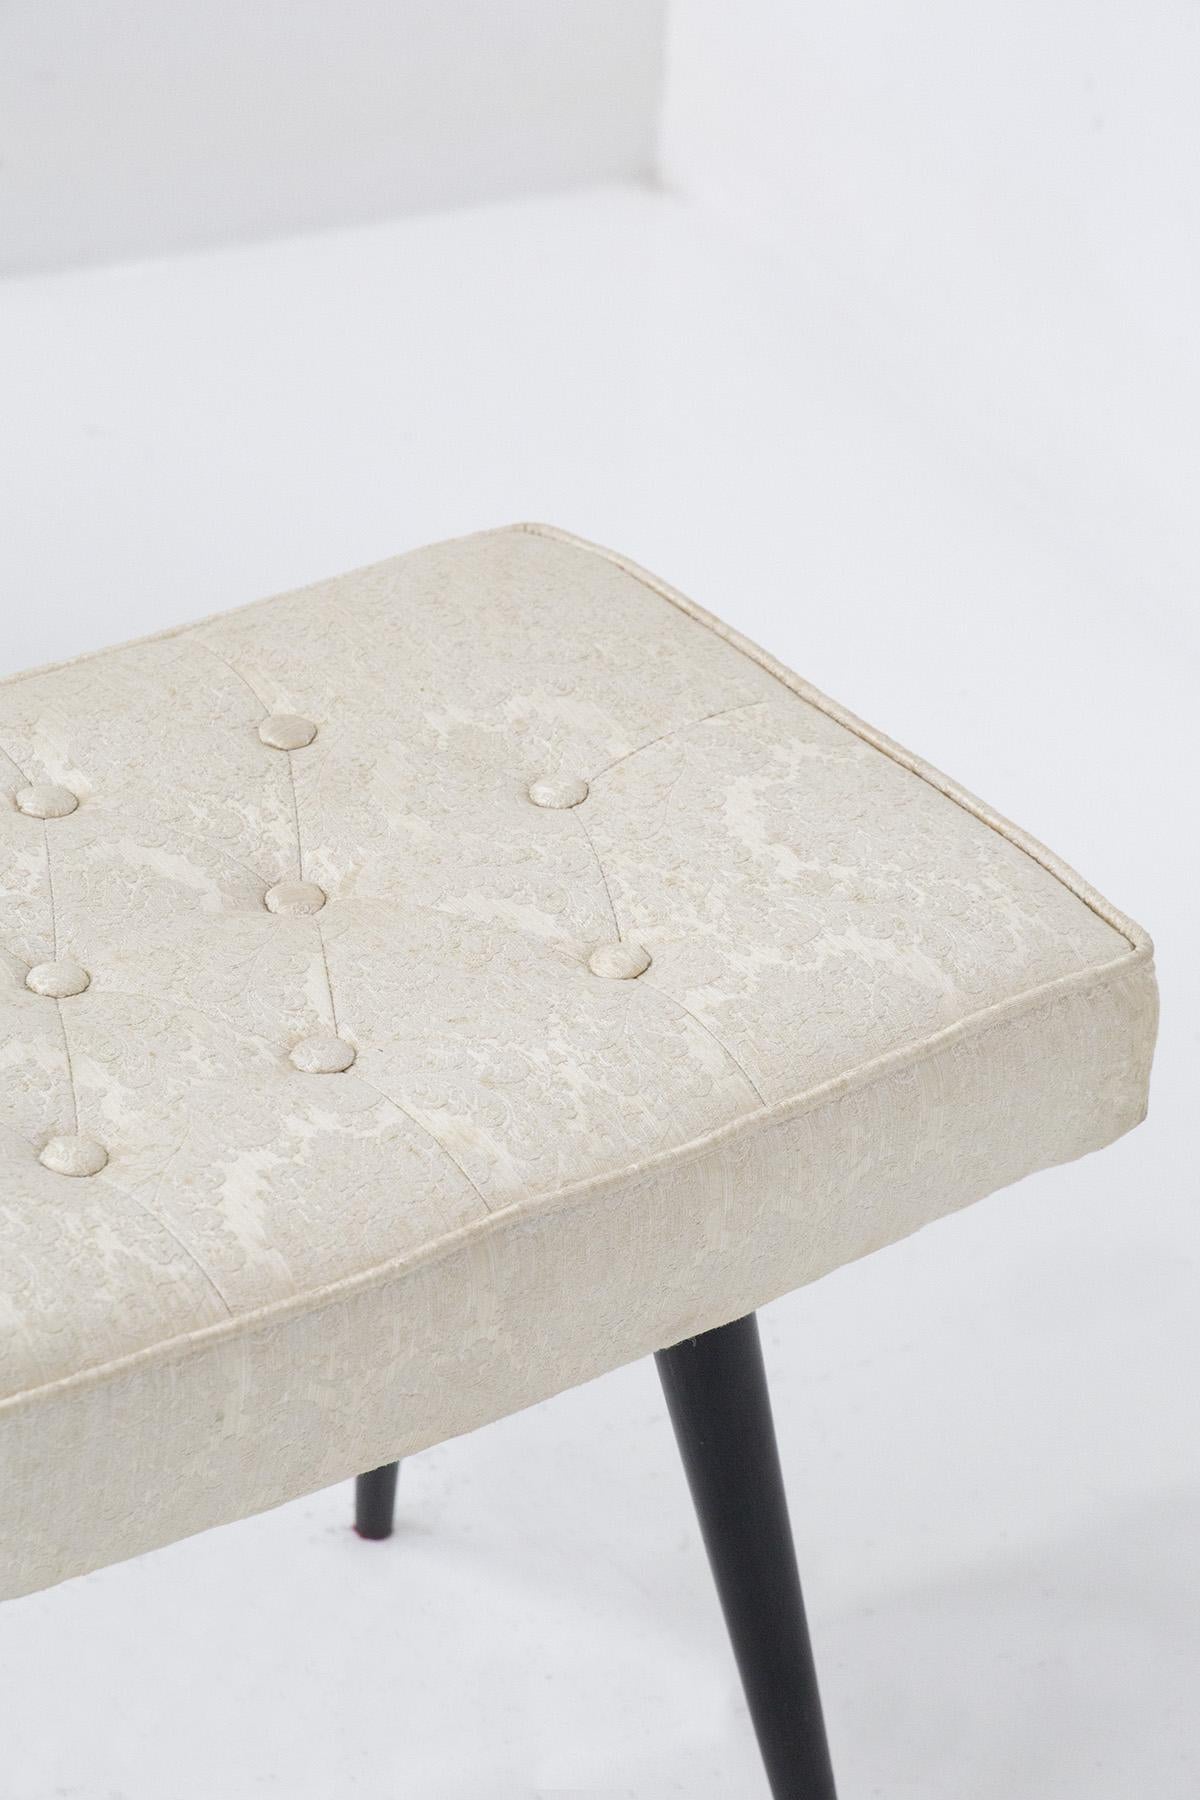 Mid-20th Century Italian Mid-Century Stools in Wood and Brocade For Sale